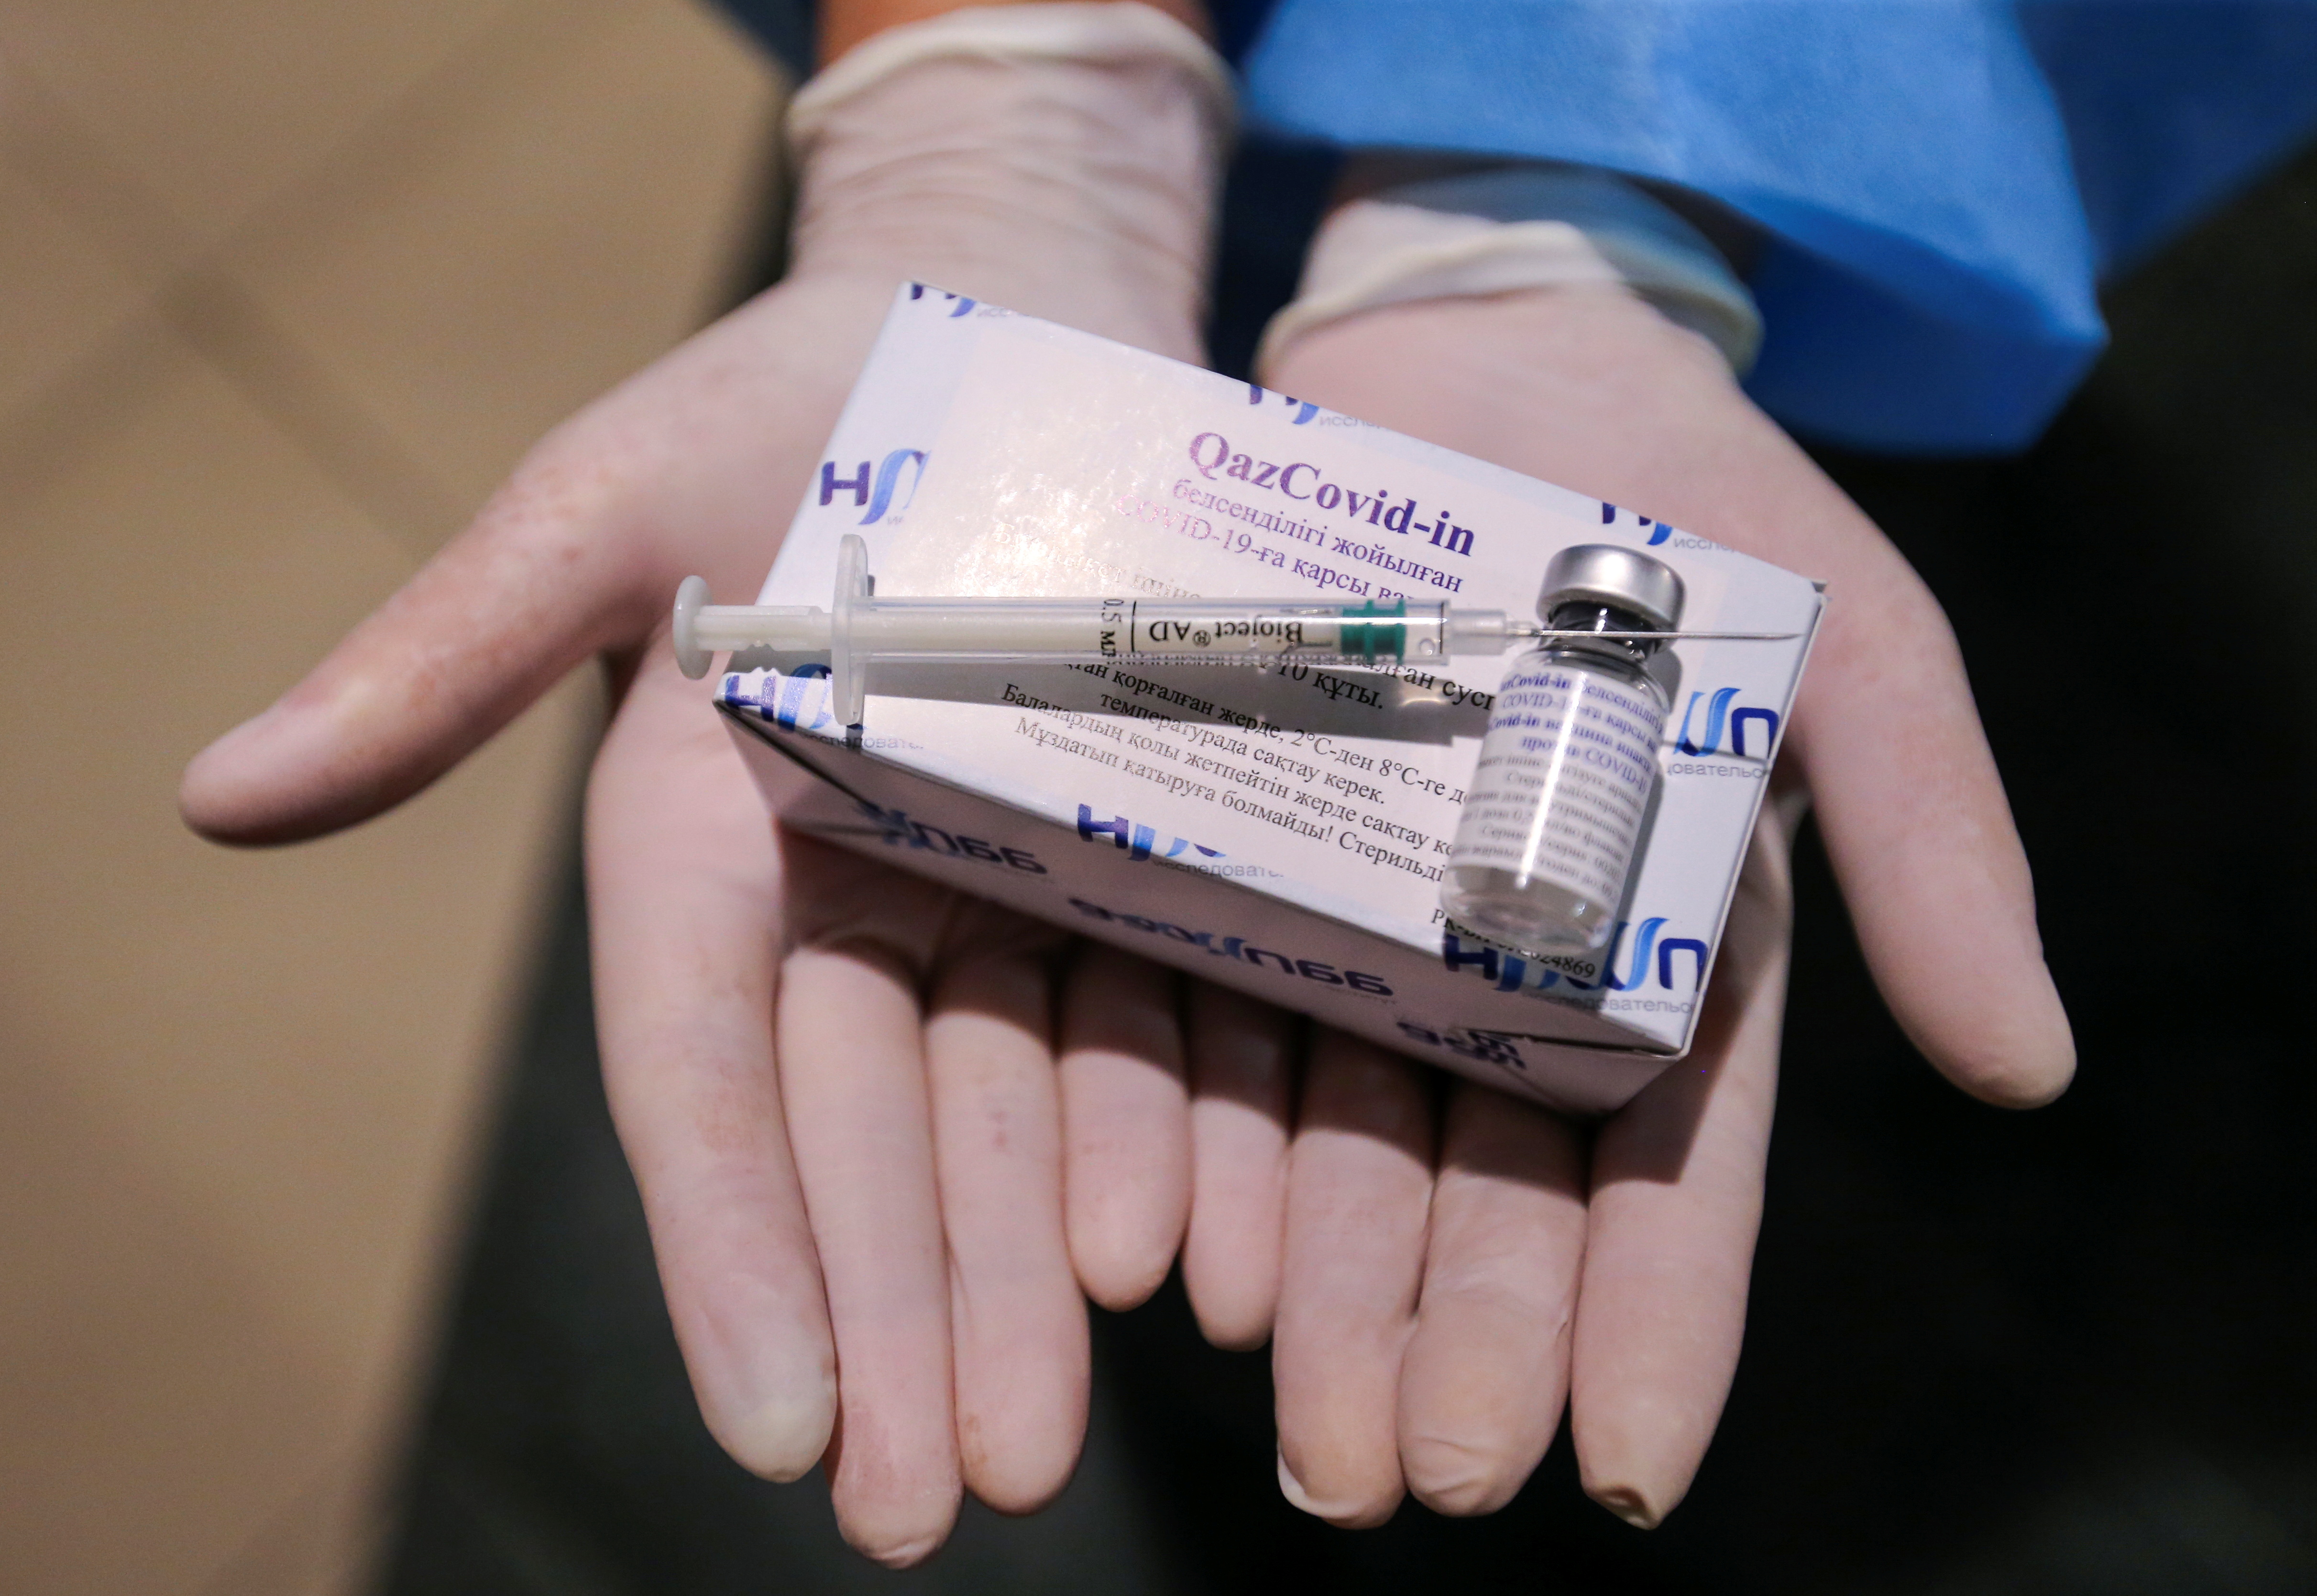 A medical worker shows the QazCovid-in vaccine in Almaty